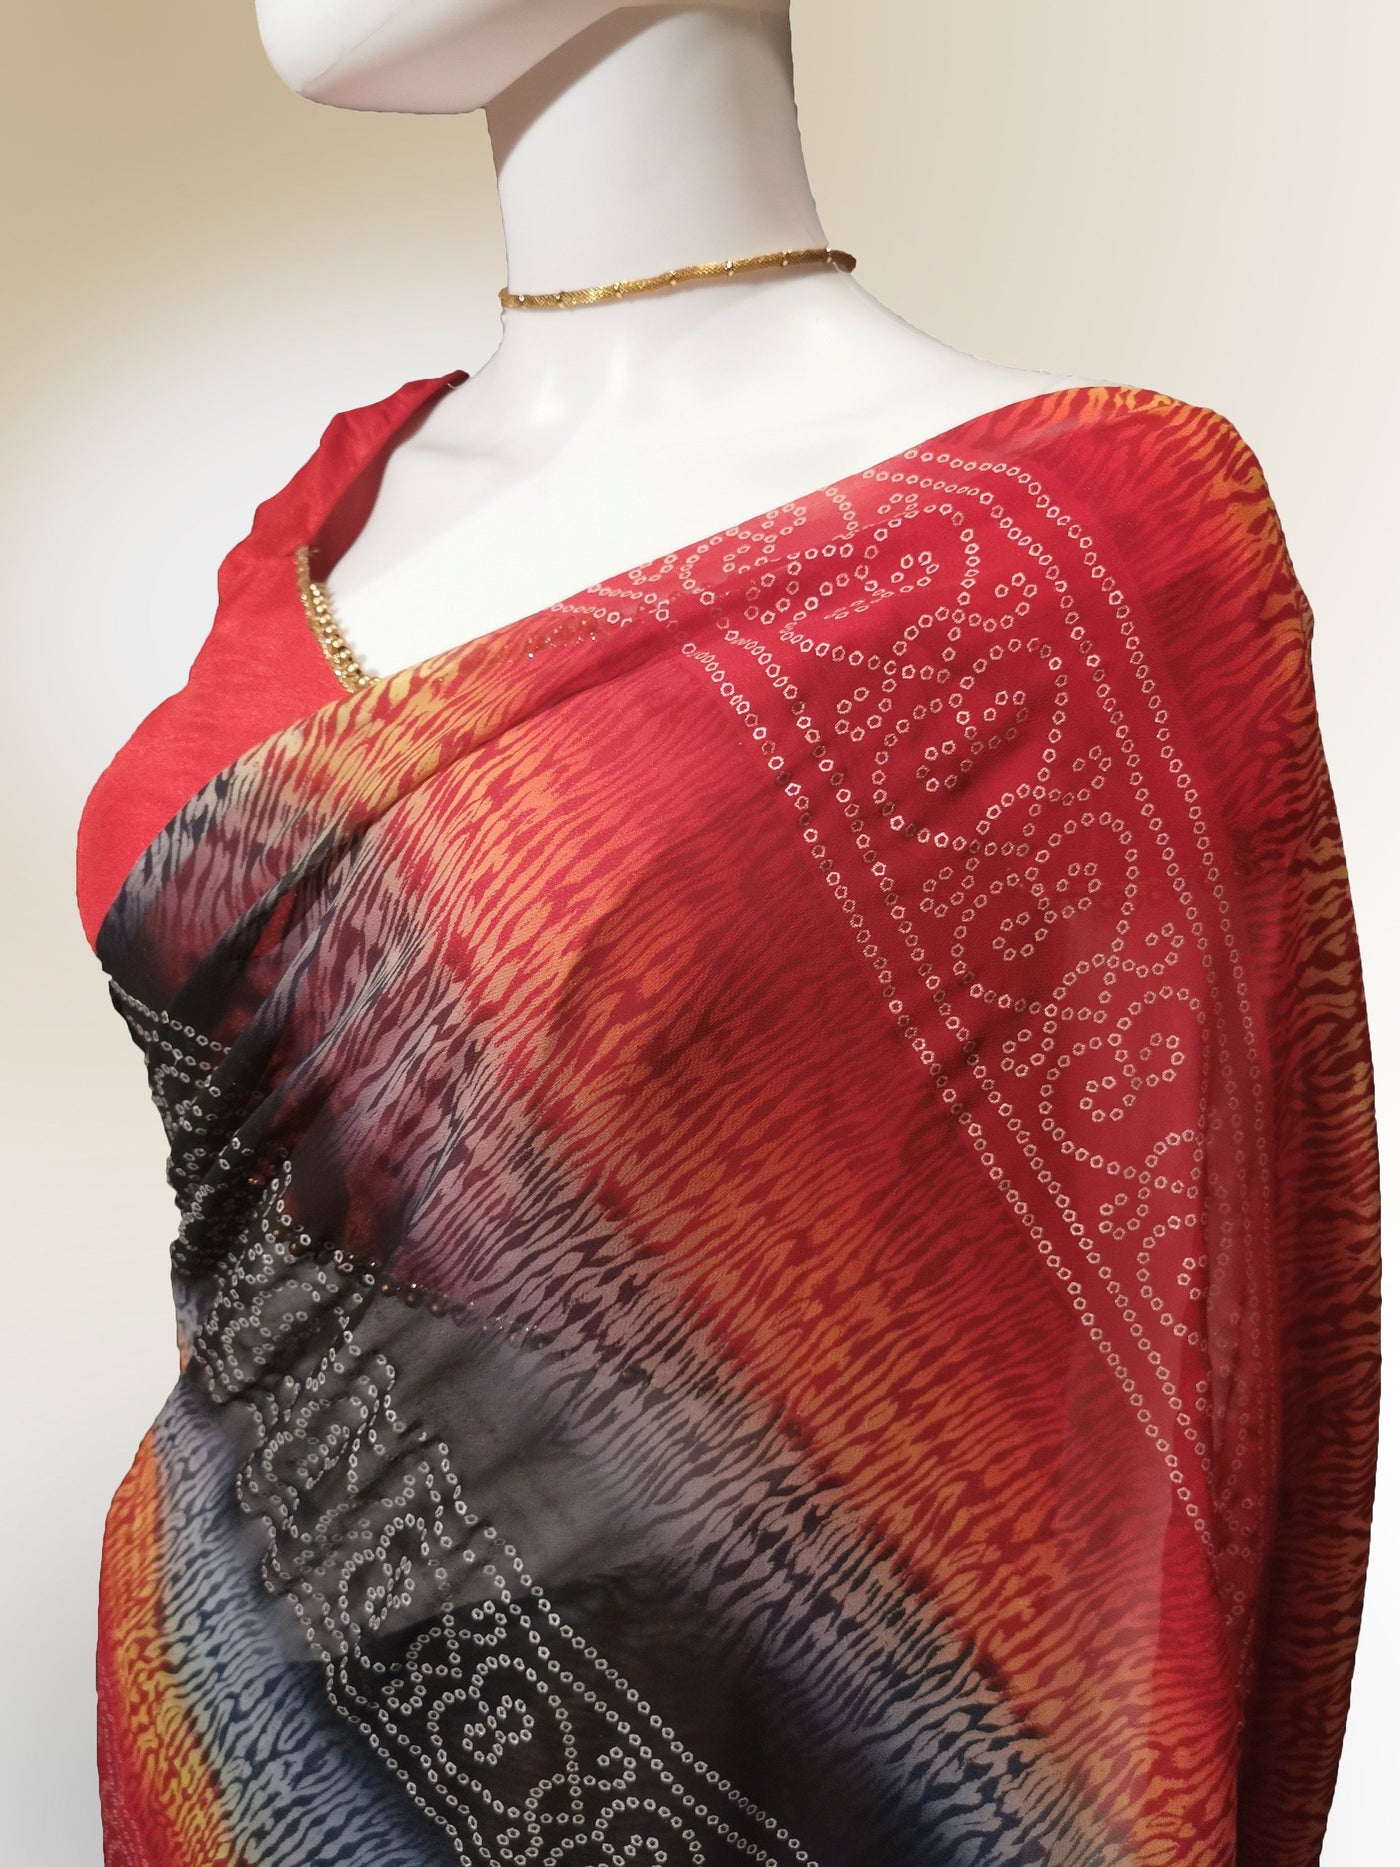 Saree in Fiery Red blend and Black with Henna Print Indian Clothing in Denver, CO, Aurora, CO, Boulder, CO, Fort Collins, CO, Colorado Springs, CO, Parker, CO, Highlands Ranch, CO, Cherry Creek, CO, Centennial, CO, and Longmont, CO. NATIONWIDE SHIPPING USA- India Fashion X